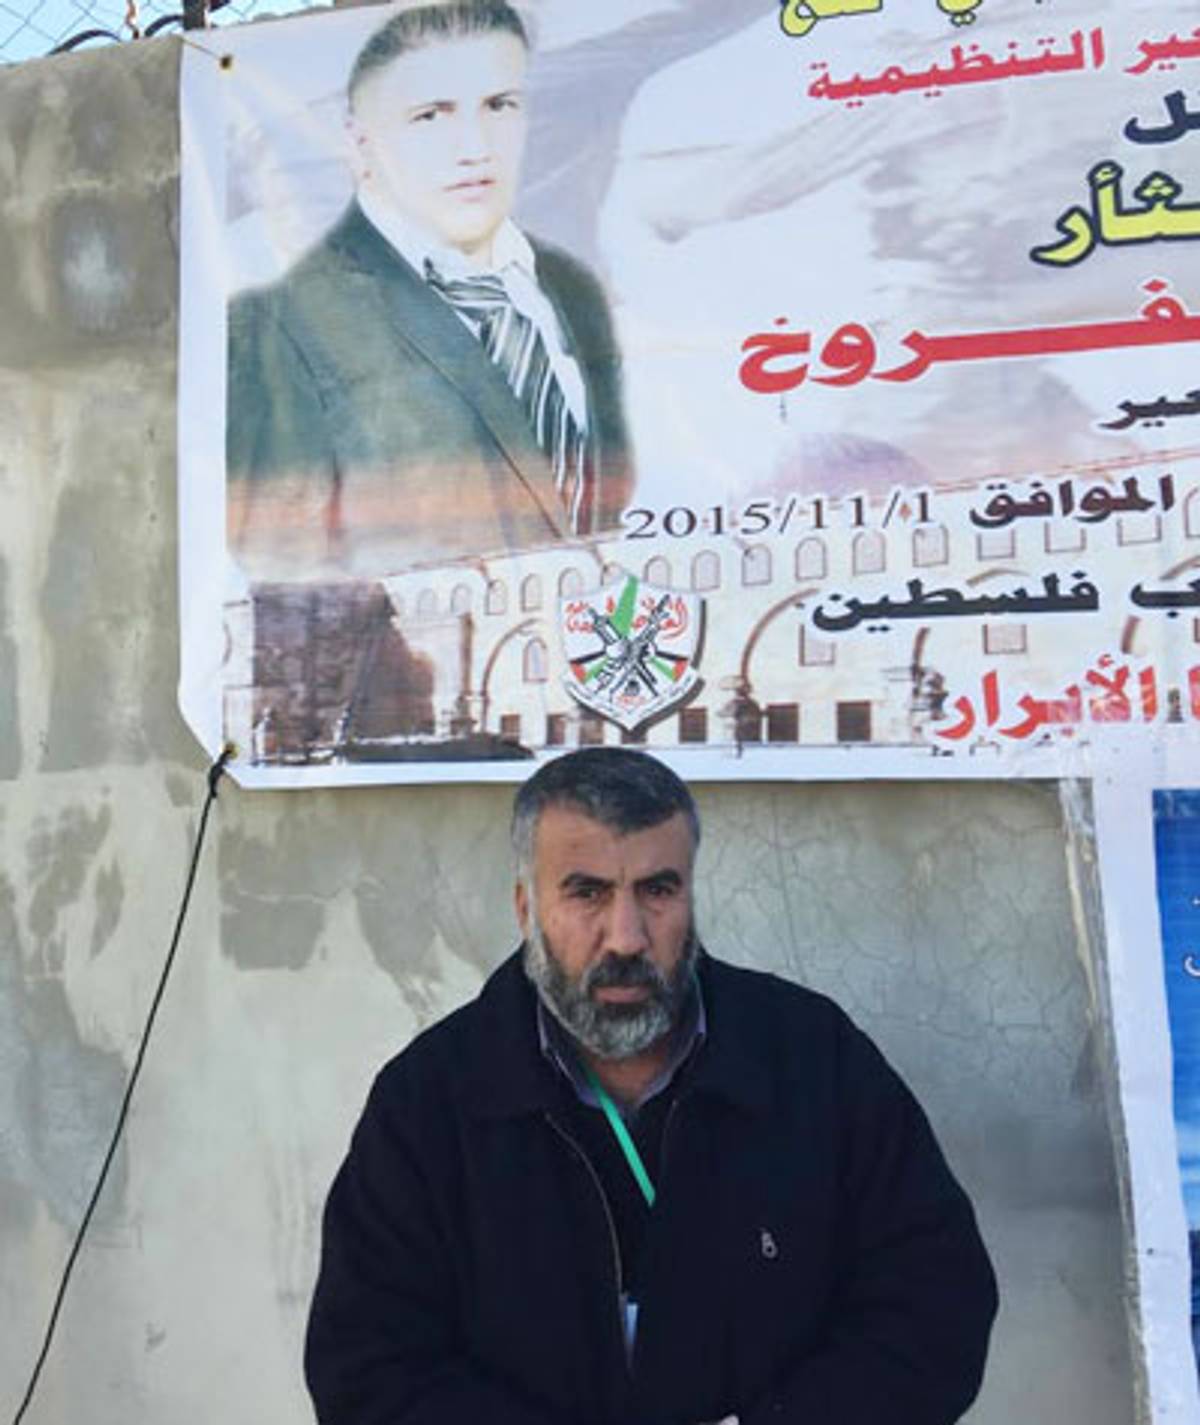 Hassan Faroukh stands next to a banner displaying his son, Fadi, 27, killed while trying to stab an Israeli soldier outside the village of Beit Anoun on Nov. 1, 2015. (Photo: Elhanan Miller)